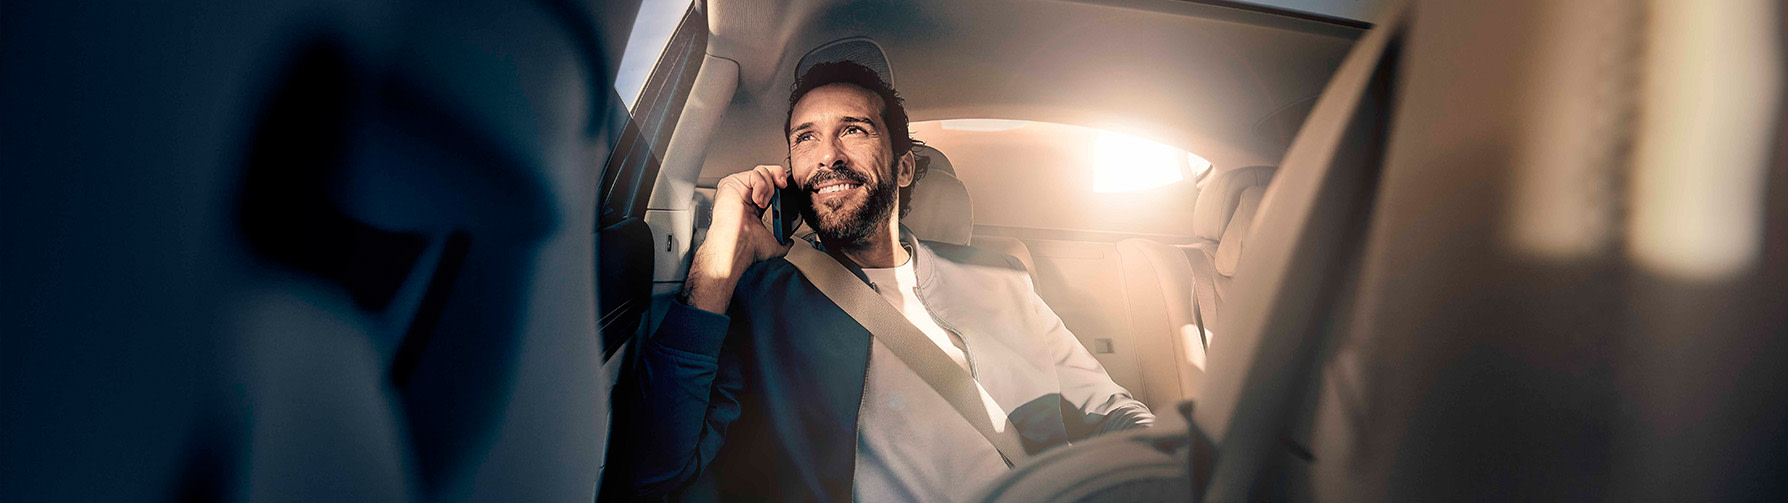 A Blacklane guest smiles while talking on the phone in the back seat of a Mercedes-Benz EQS.